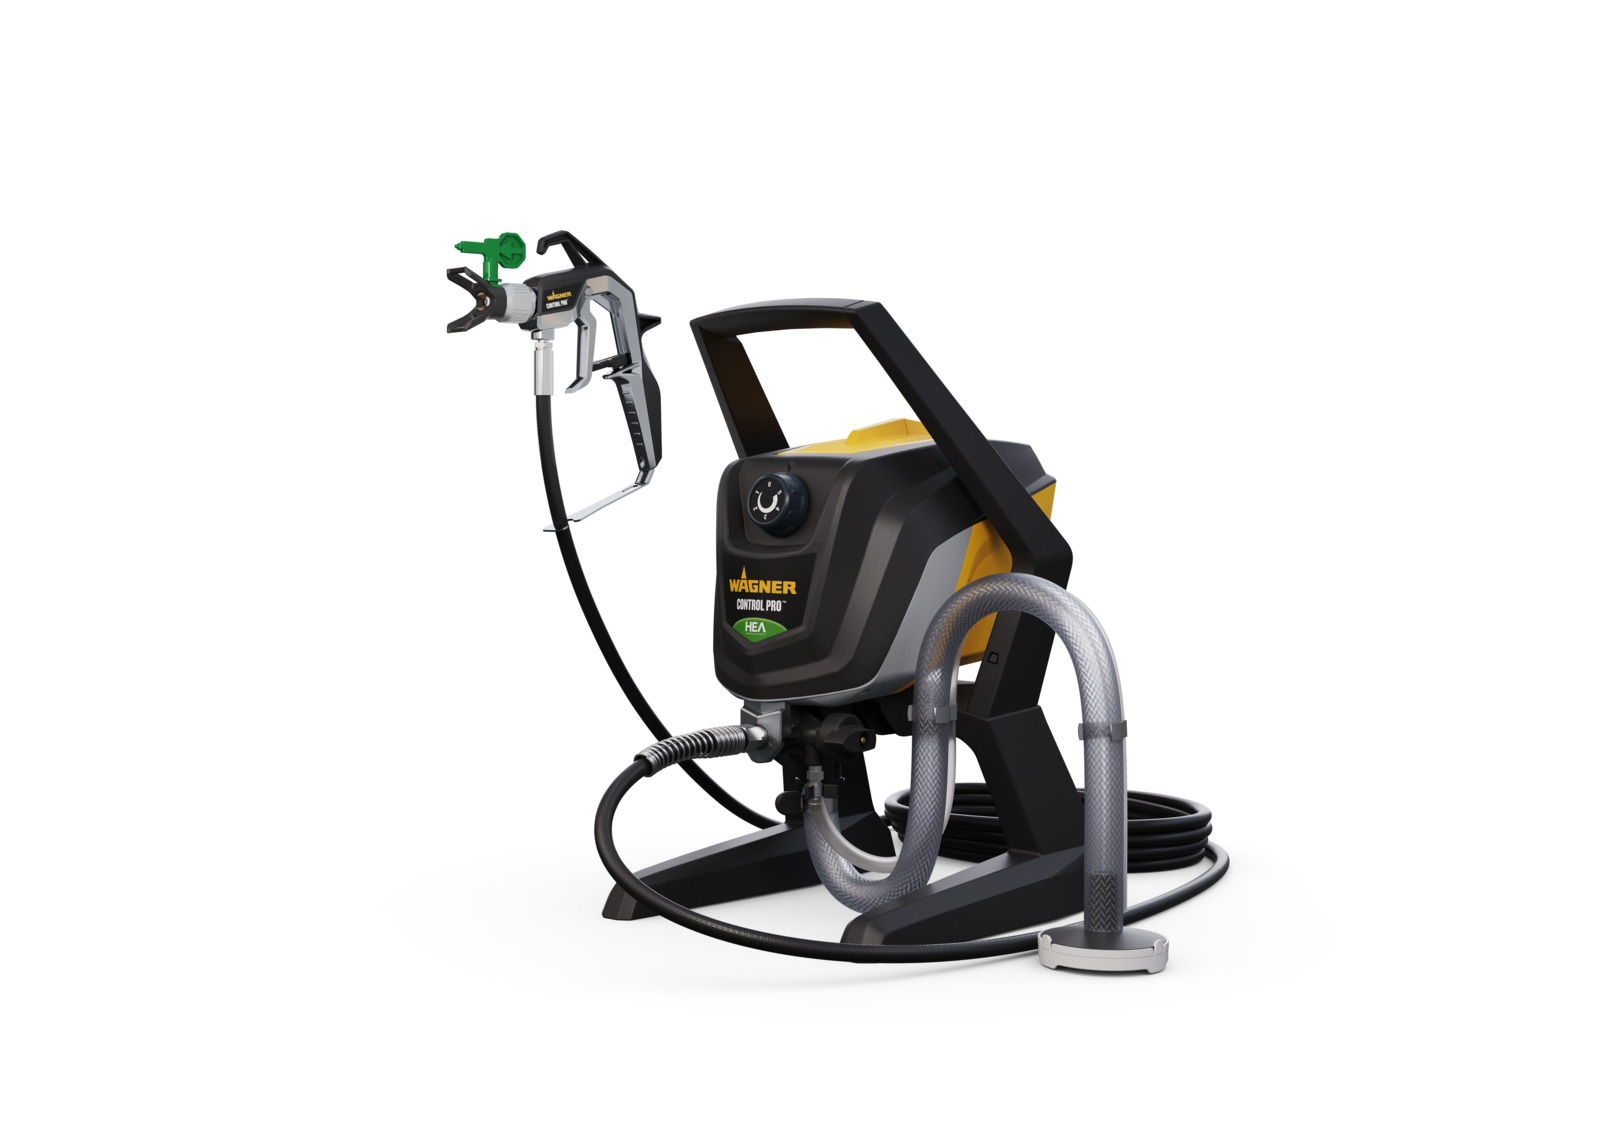 Airless Paint Sprayer - WAGNER Control Pro 250 M projects 